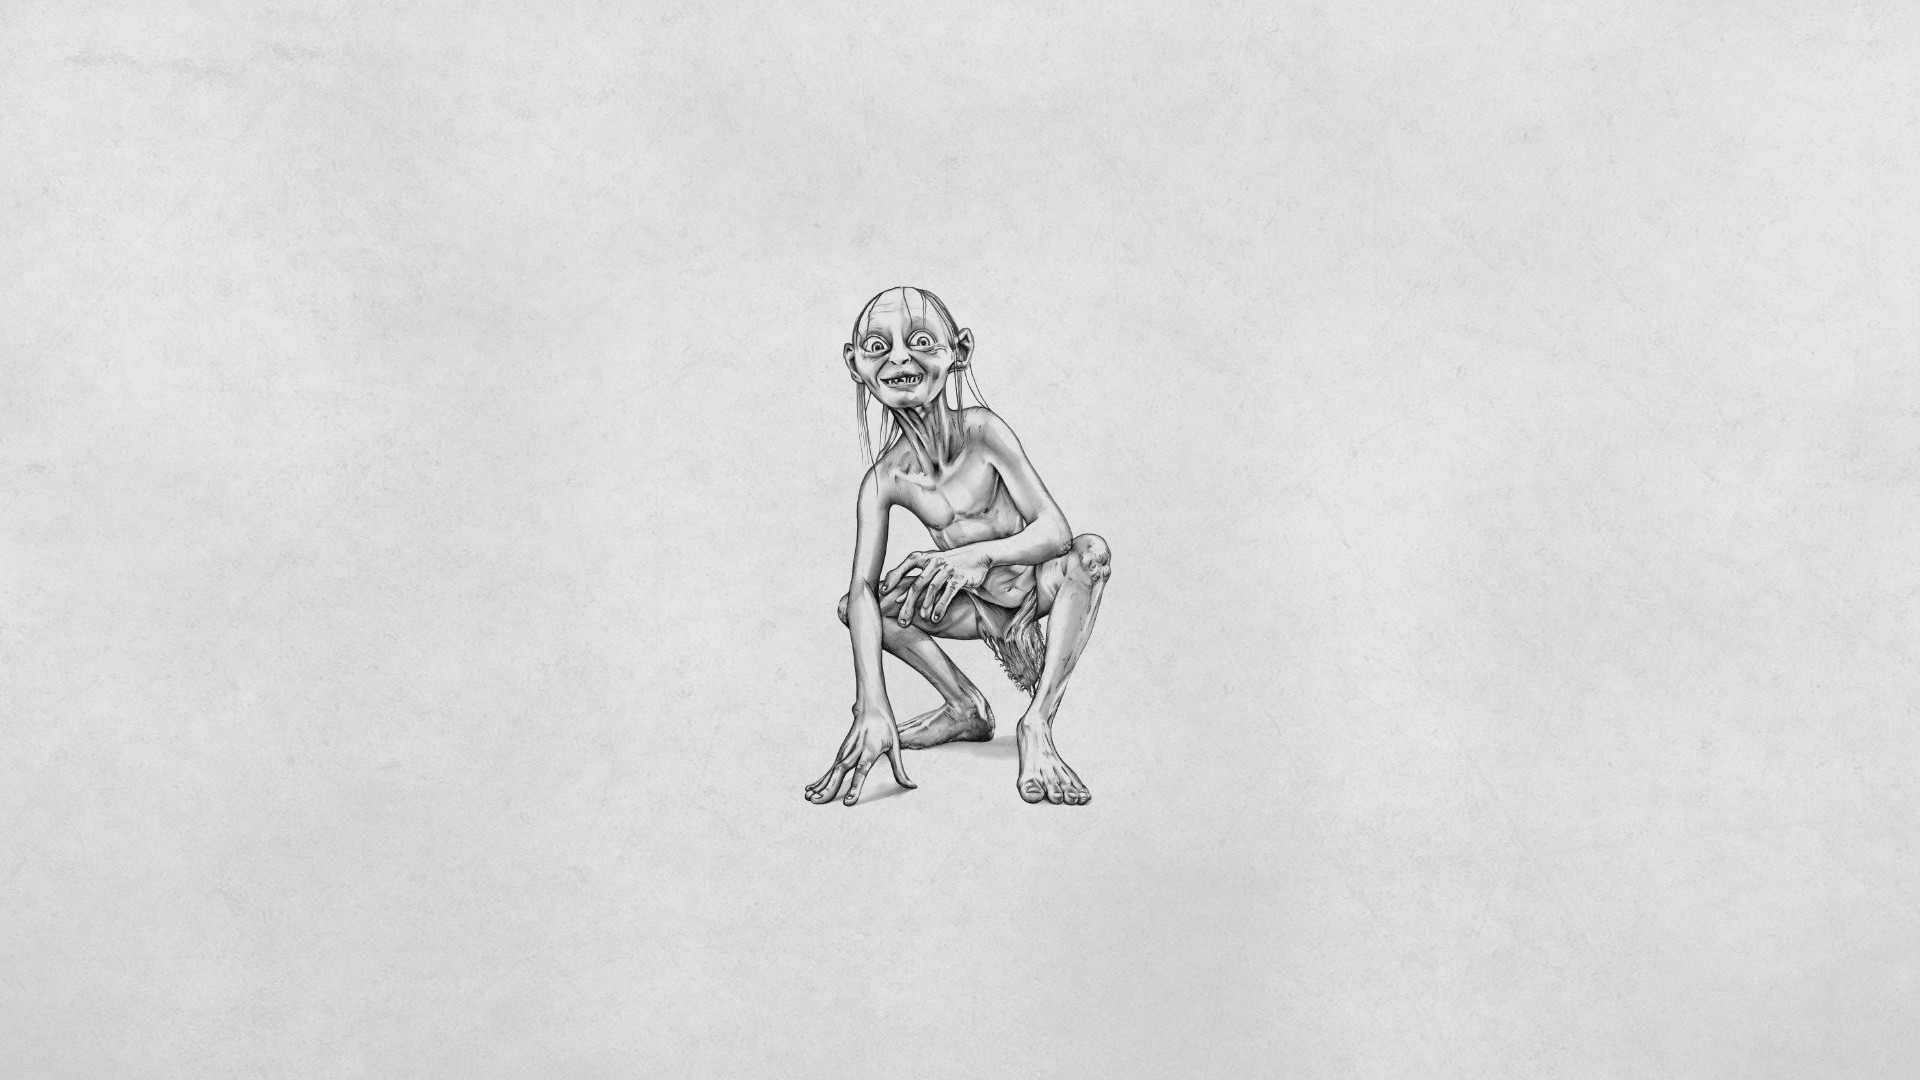 General 1920x1080 Gollum The Lord of the Rings fantasy art movies artwork creature minimalism simple background white background